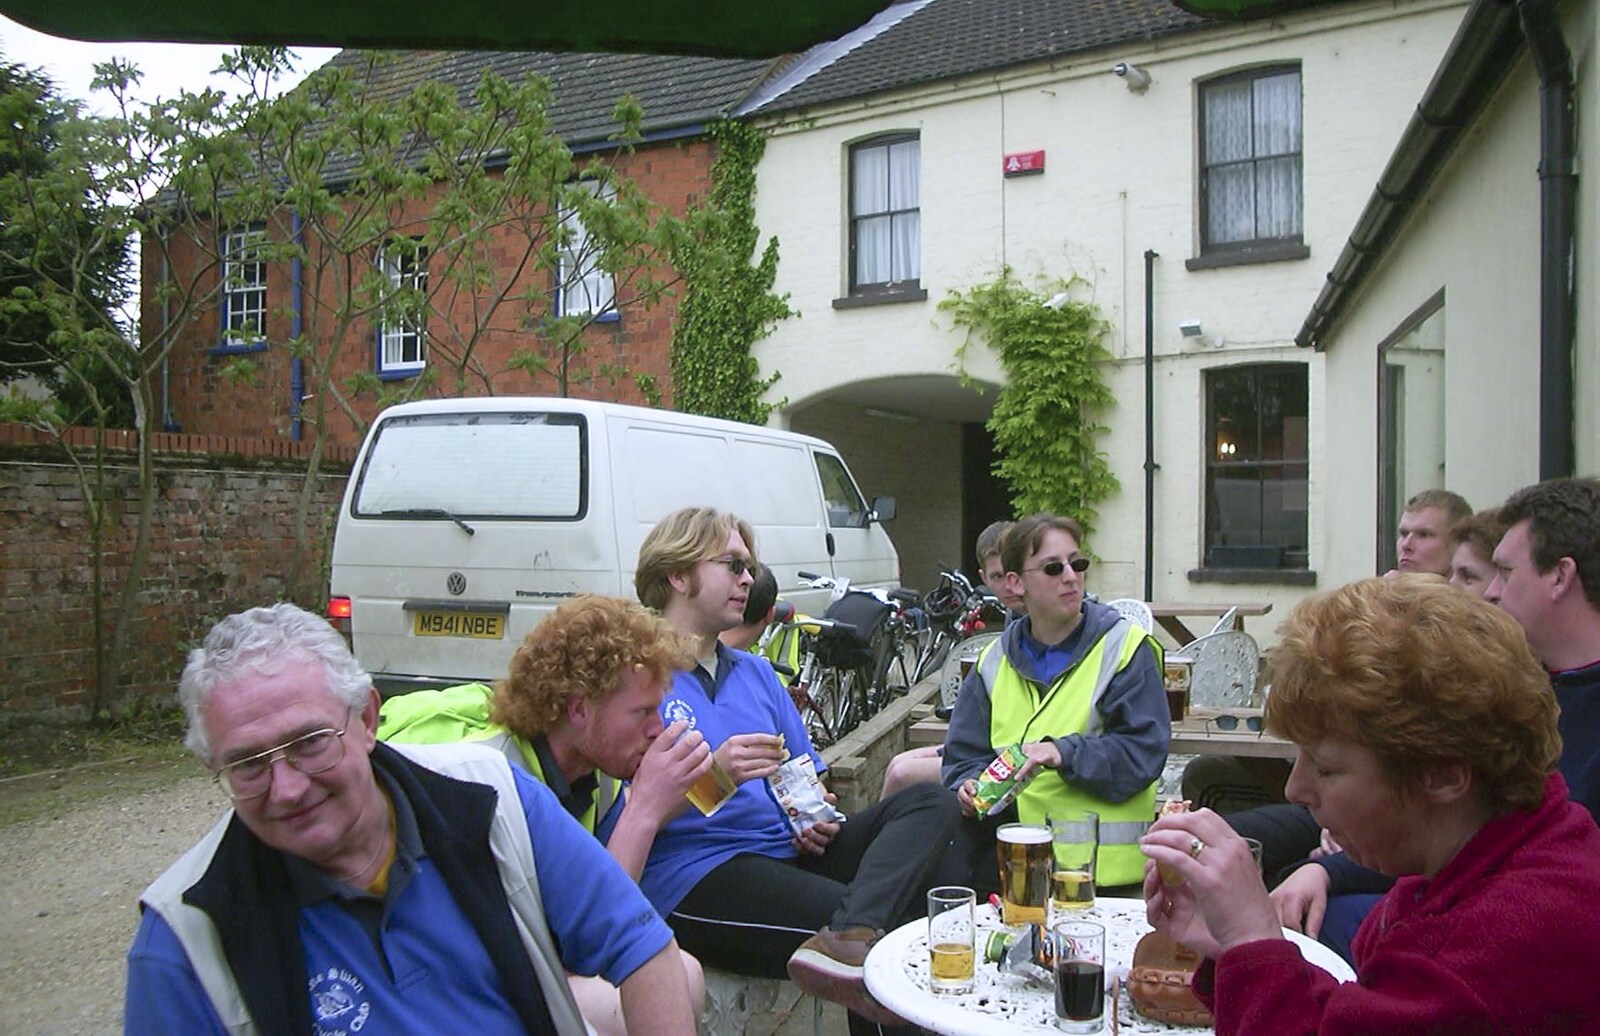 The BSCC Bike Ride, Shefford, Bedford - 11th May 2002: More pub-garden action